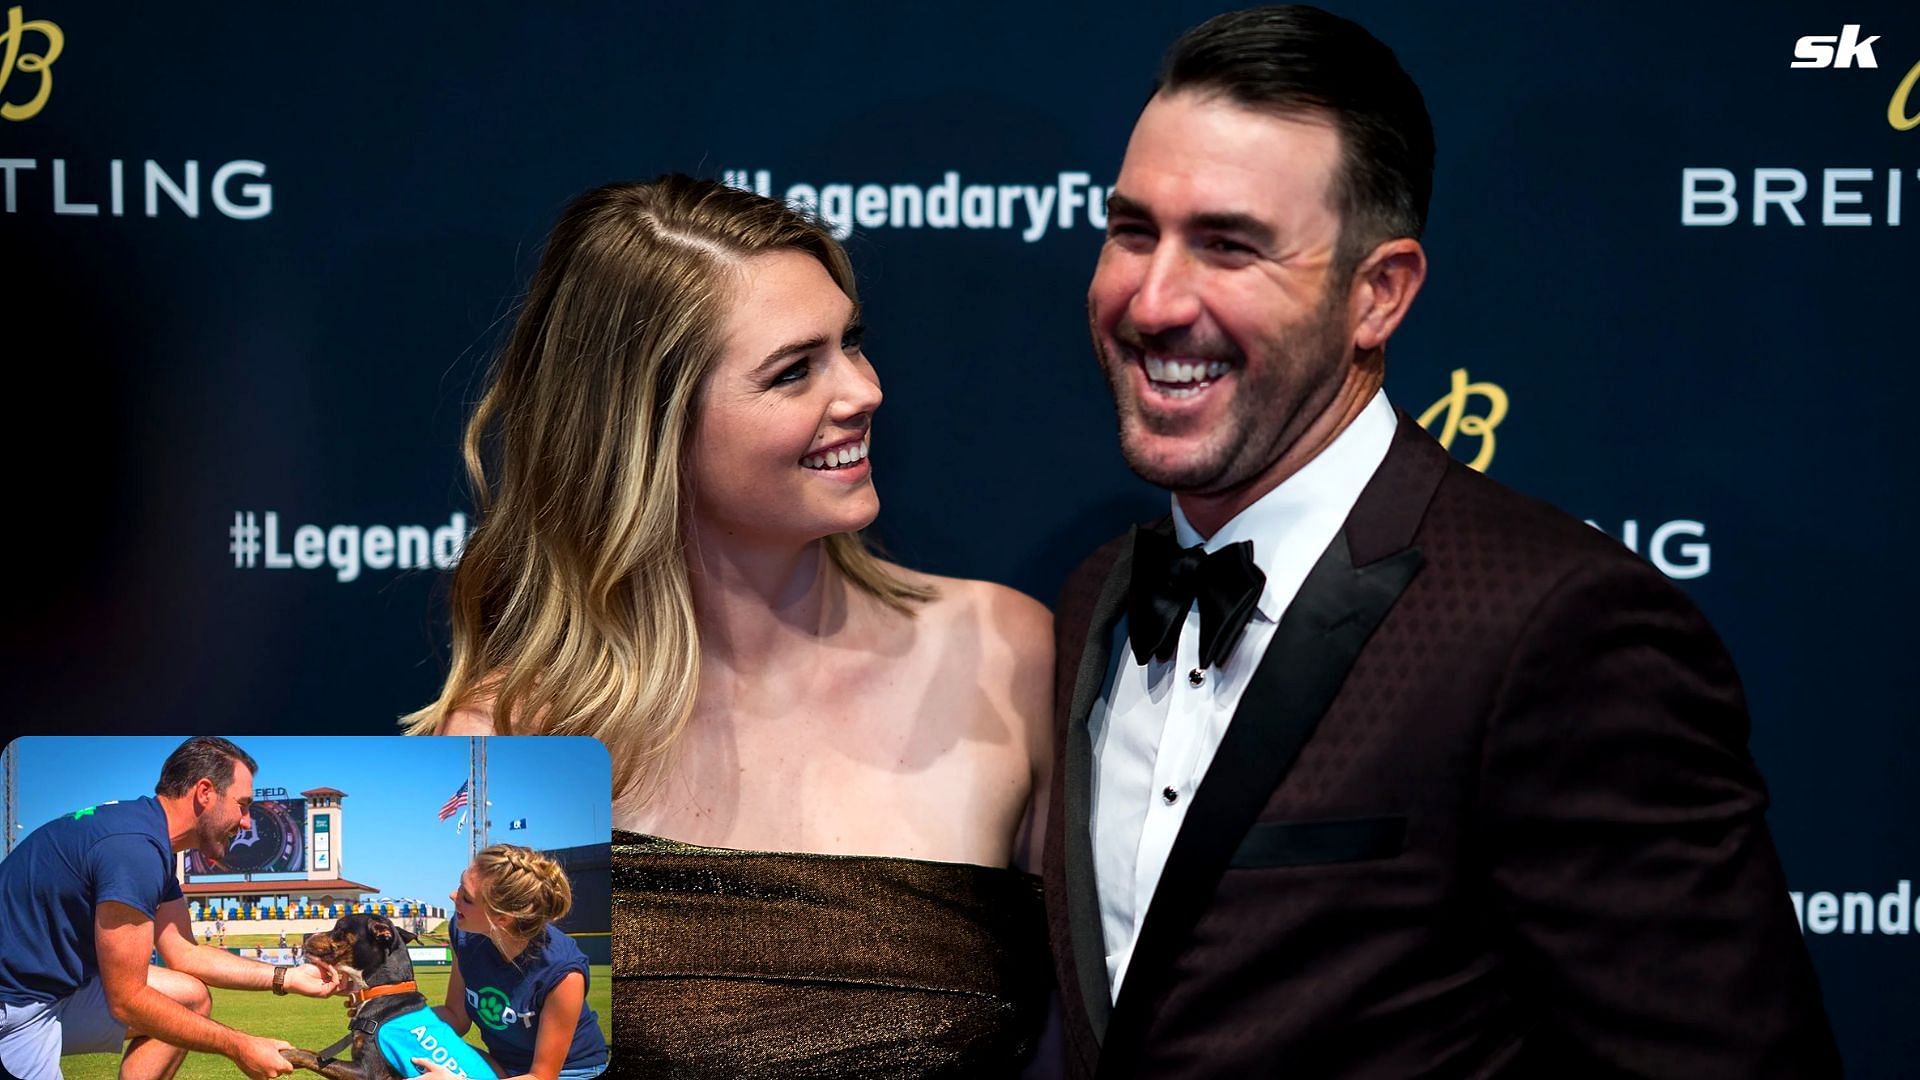 Kate Upton with Justin Verlander; Kate with Justin at Astros Dog Day in 2017 (inset)